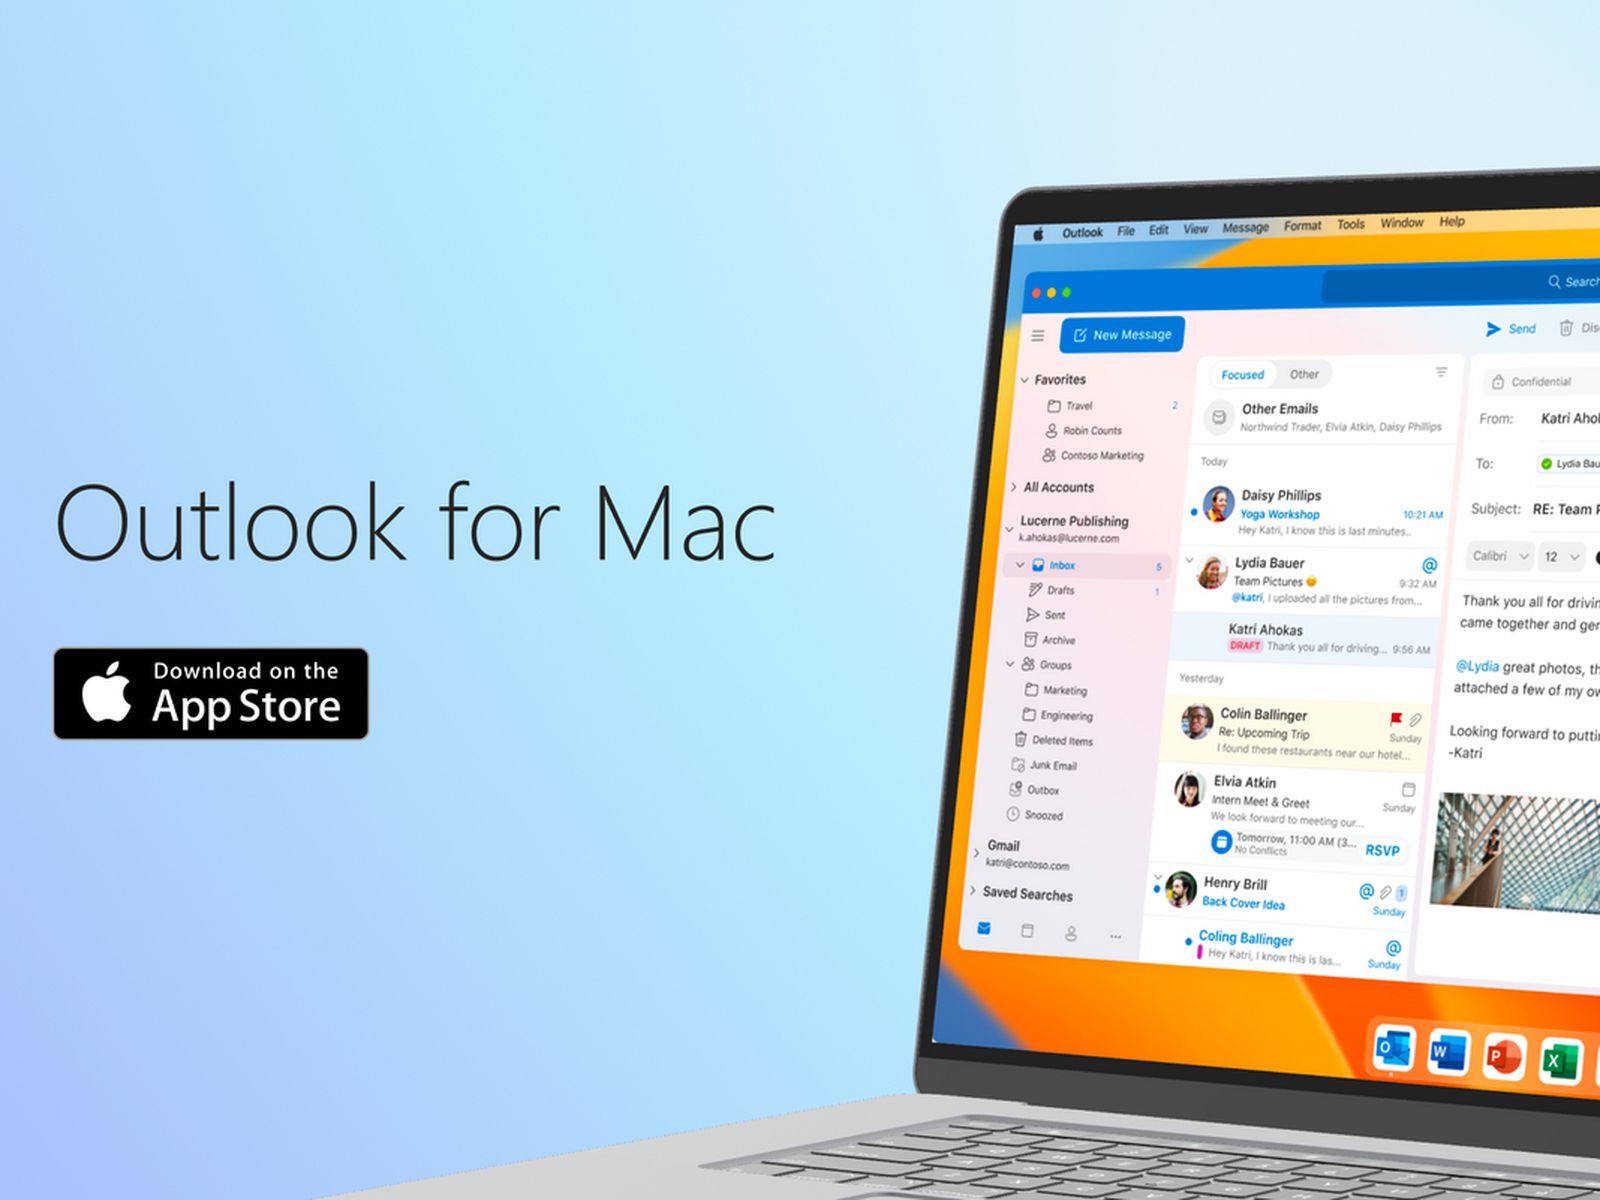 Elektropositief rem enthousiast Microsoft Announces Outlook for Mac is Now Free to Use - MacRumors